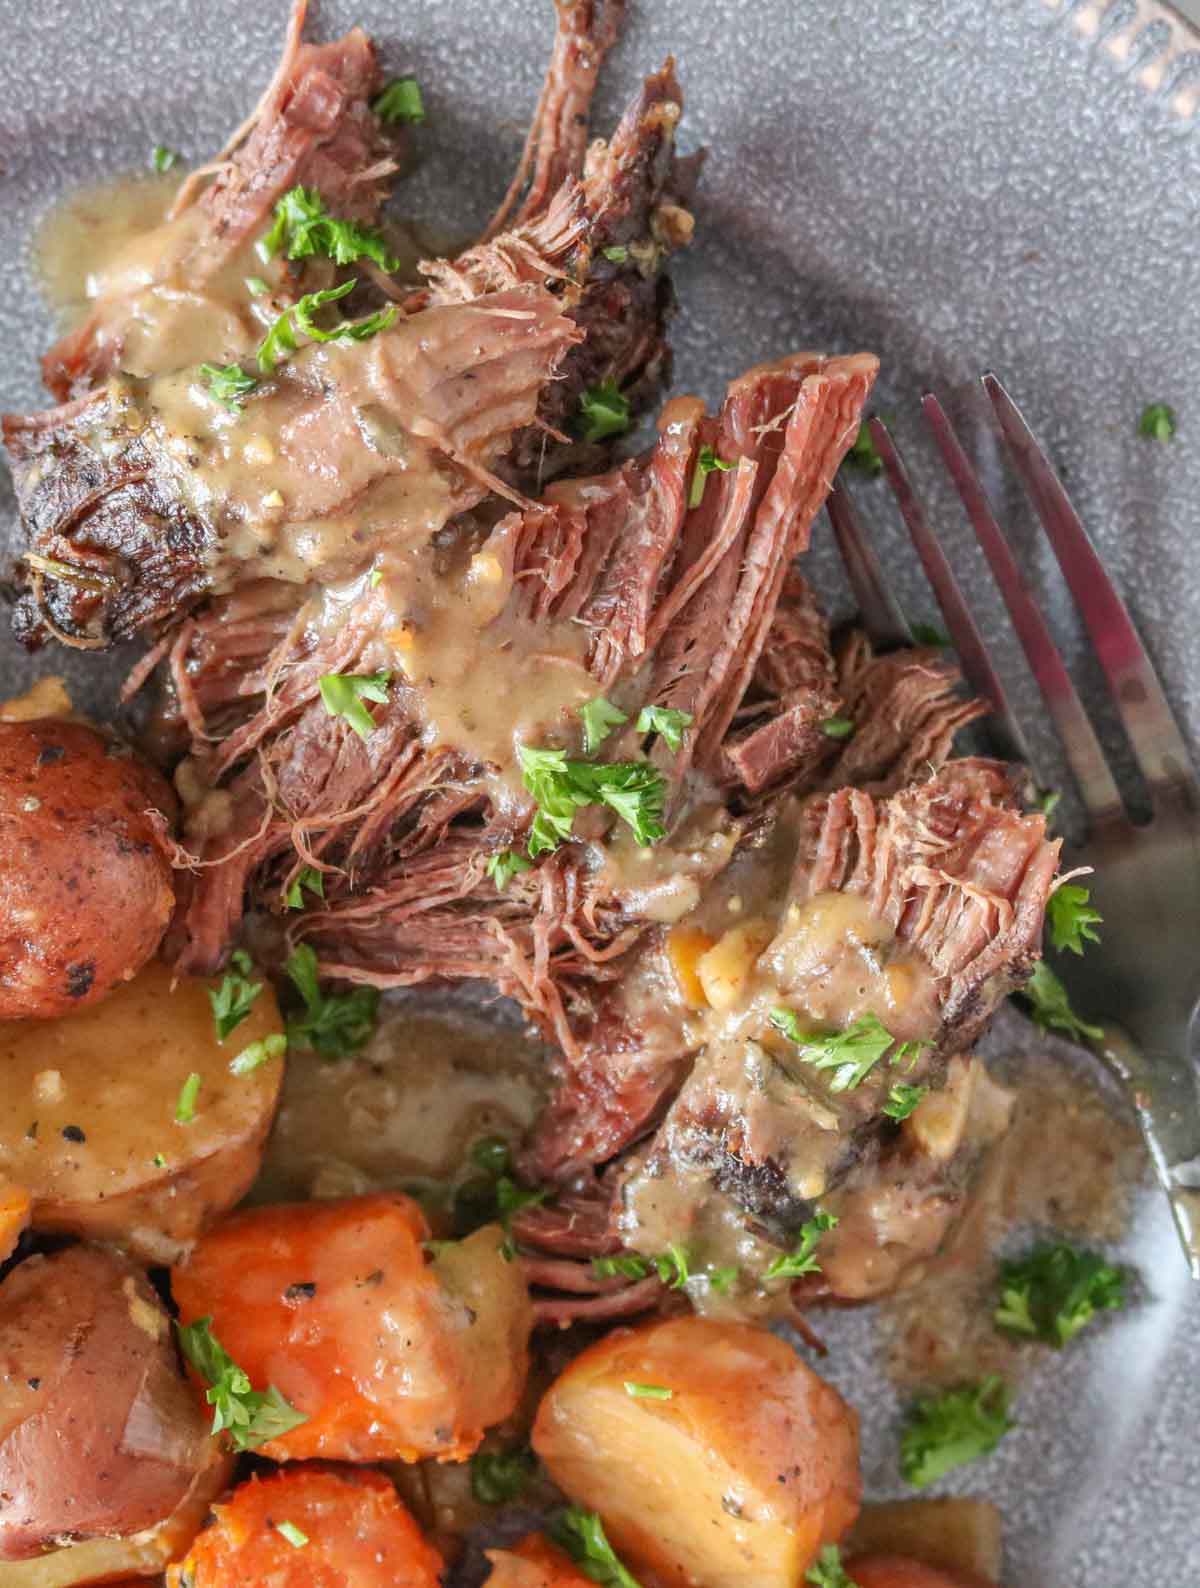 Close-up of a plate of moose meat and vegetables topped with parsley and gravy